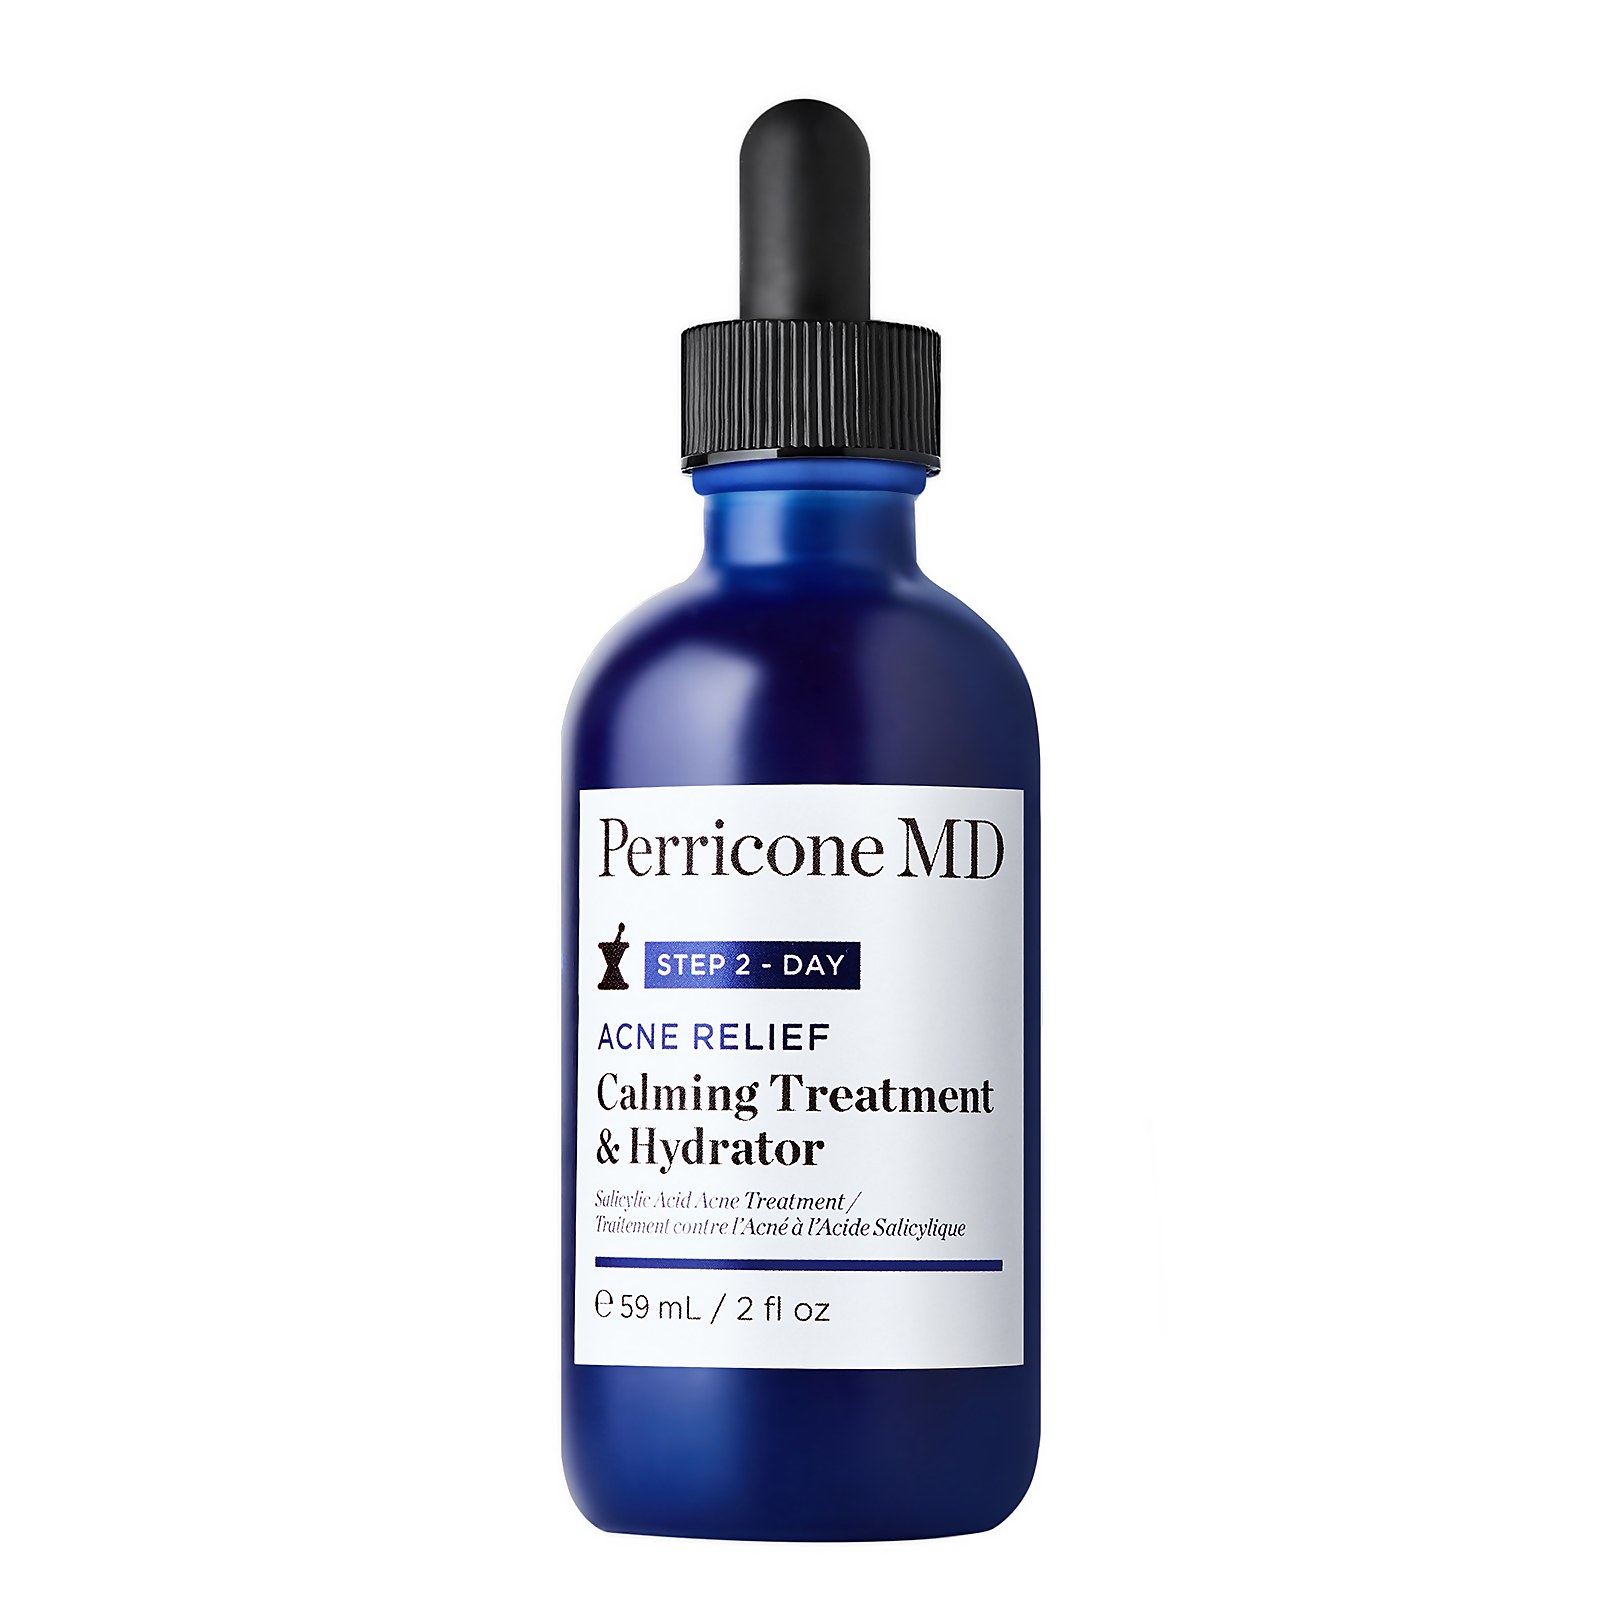 Perricone Md Acne Relief Calming Treatment & Hydrator